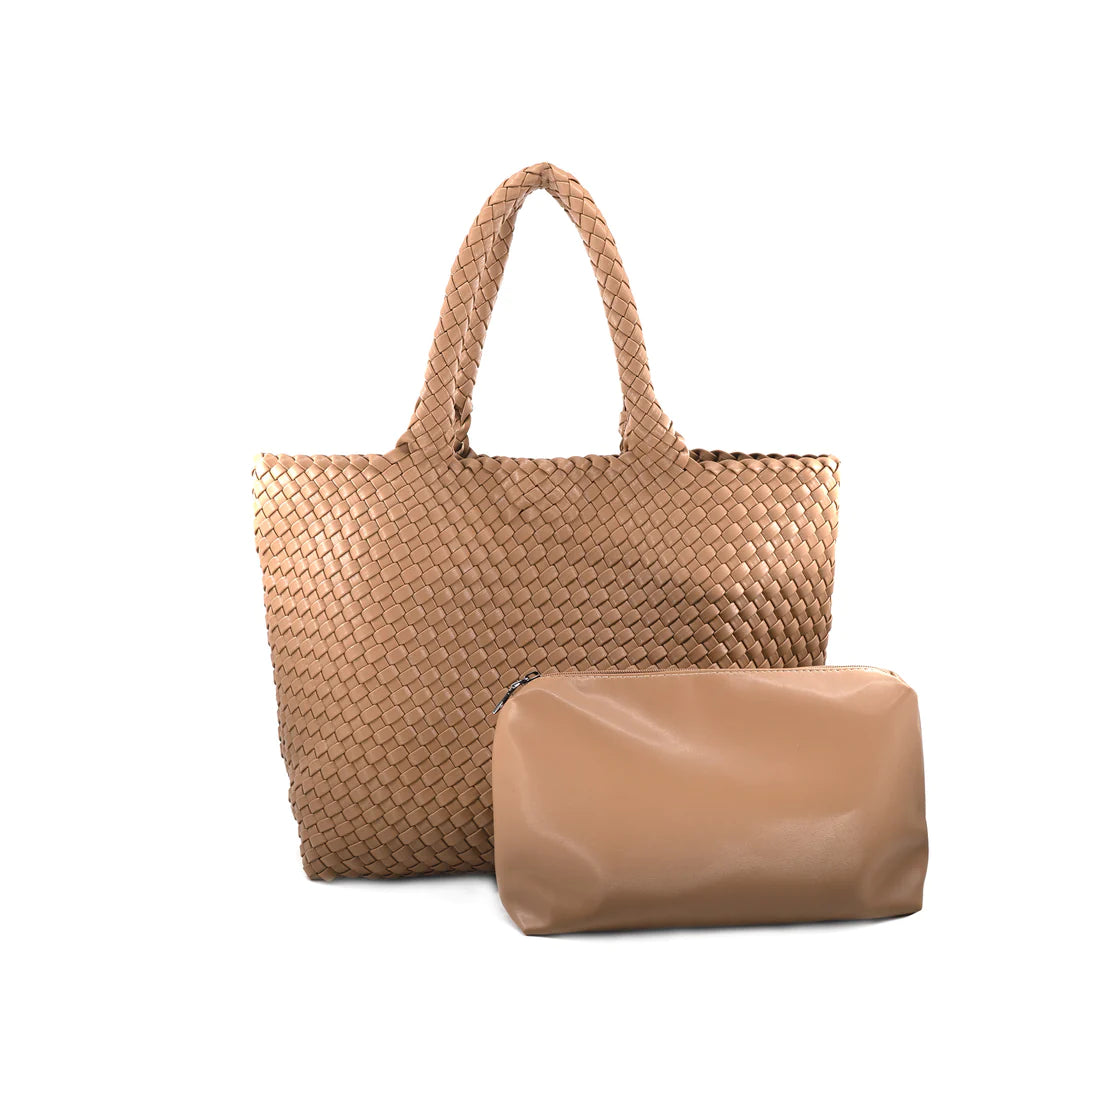 Vegan Leather Woven Tote - (multiple colors)